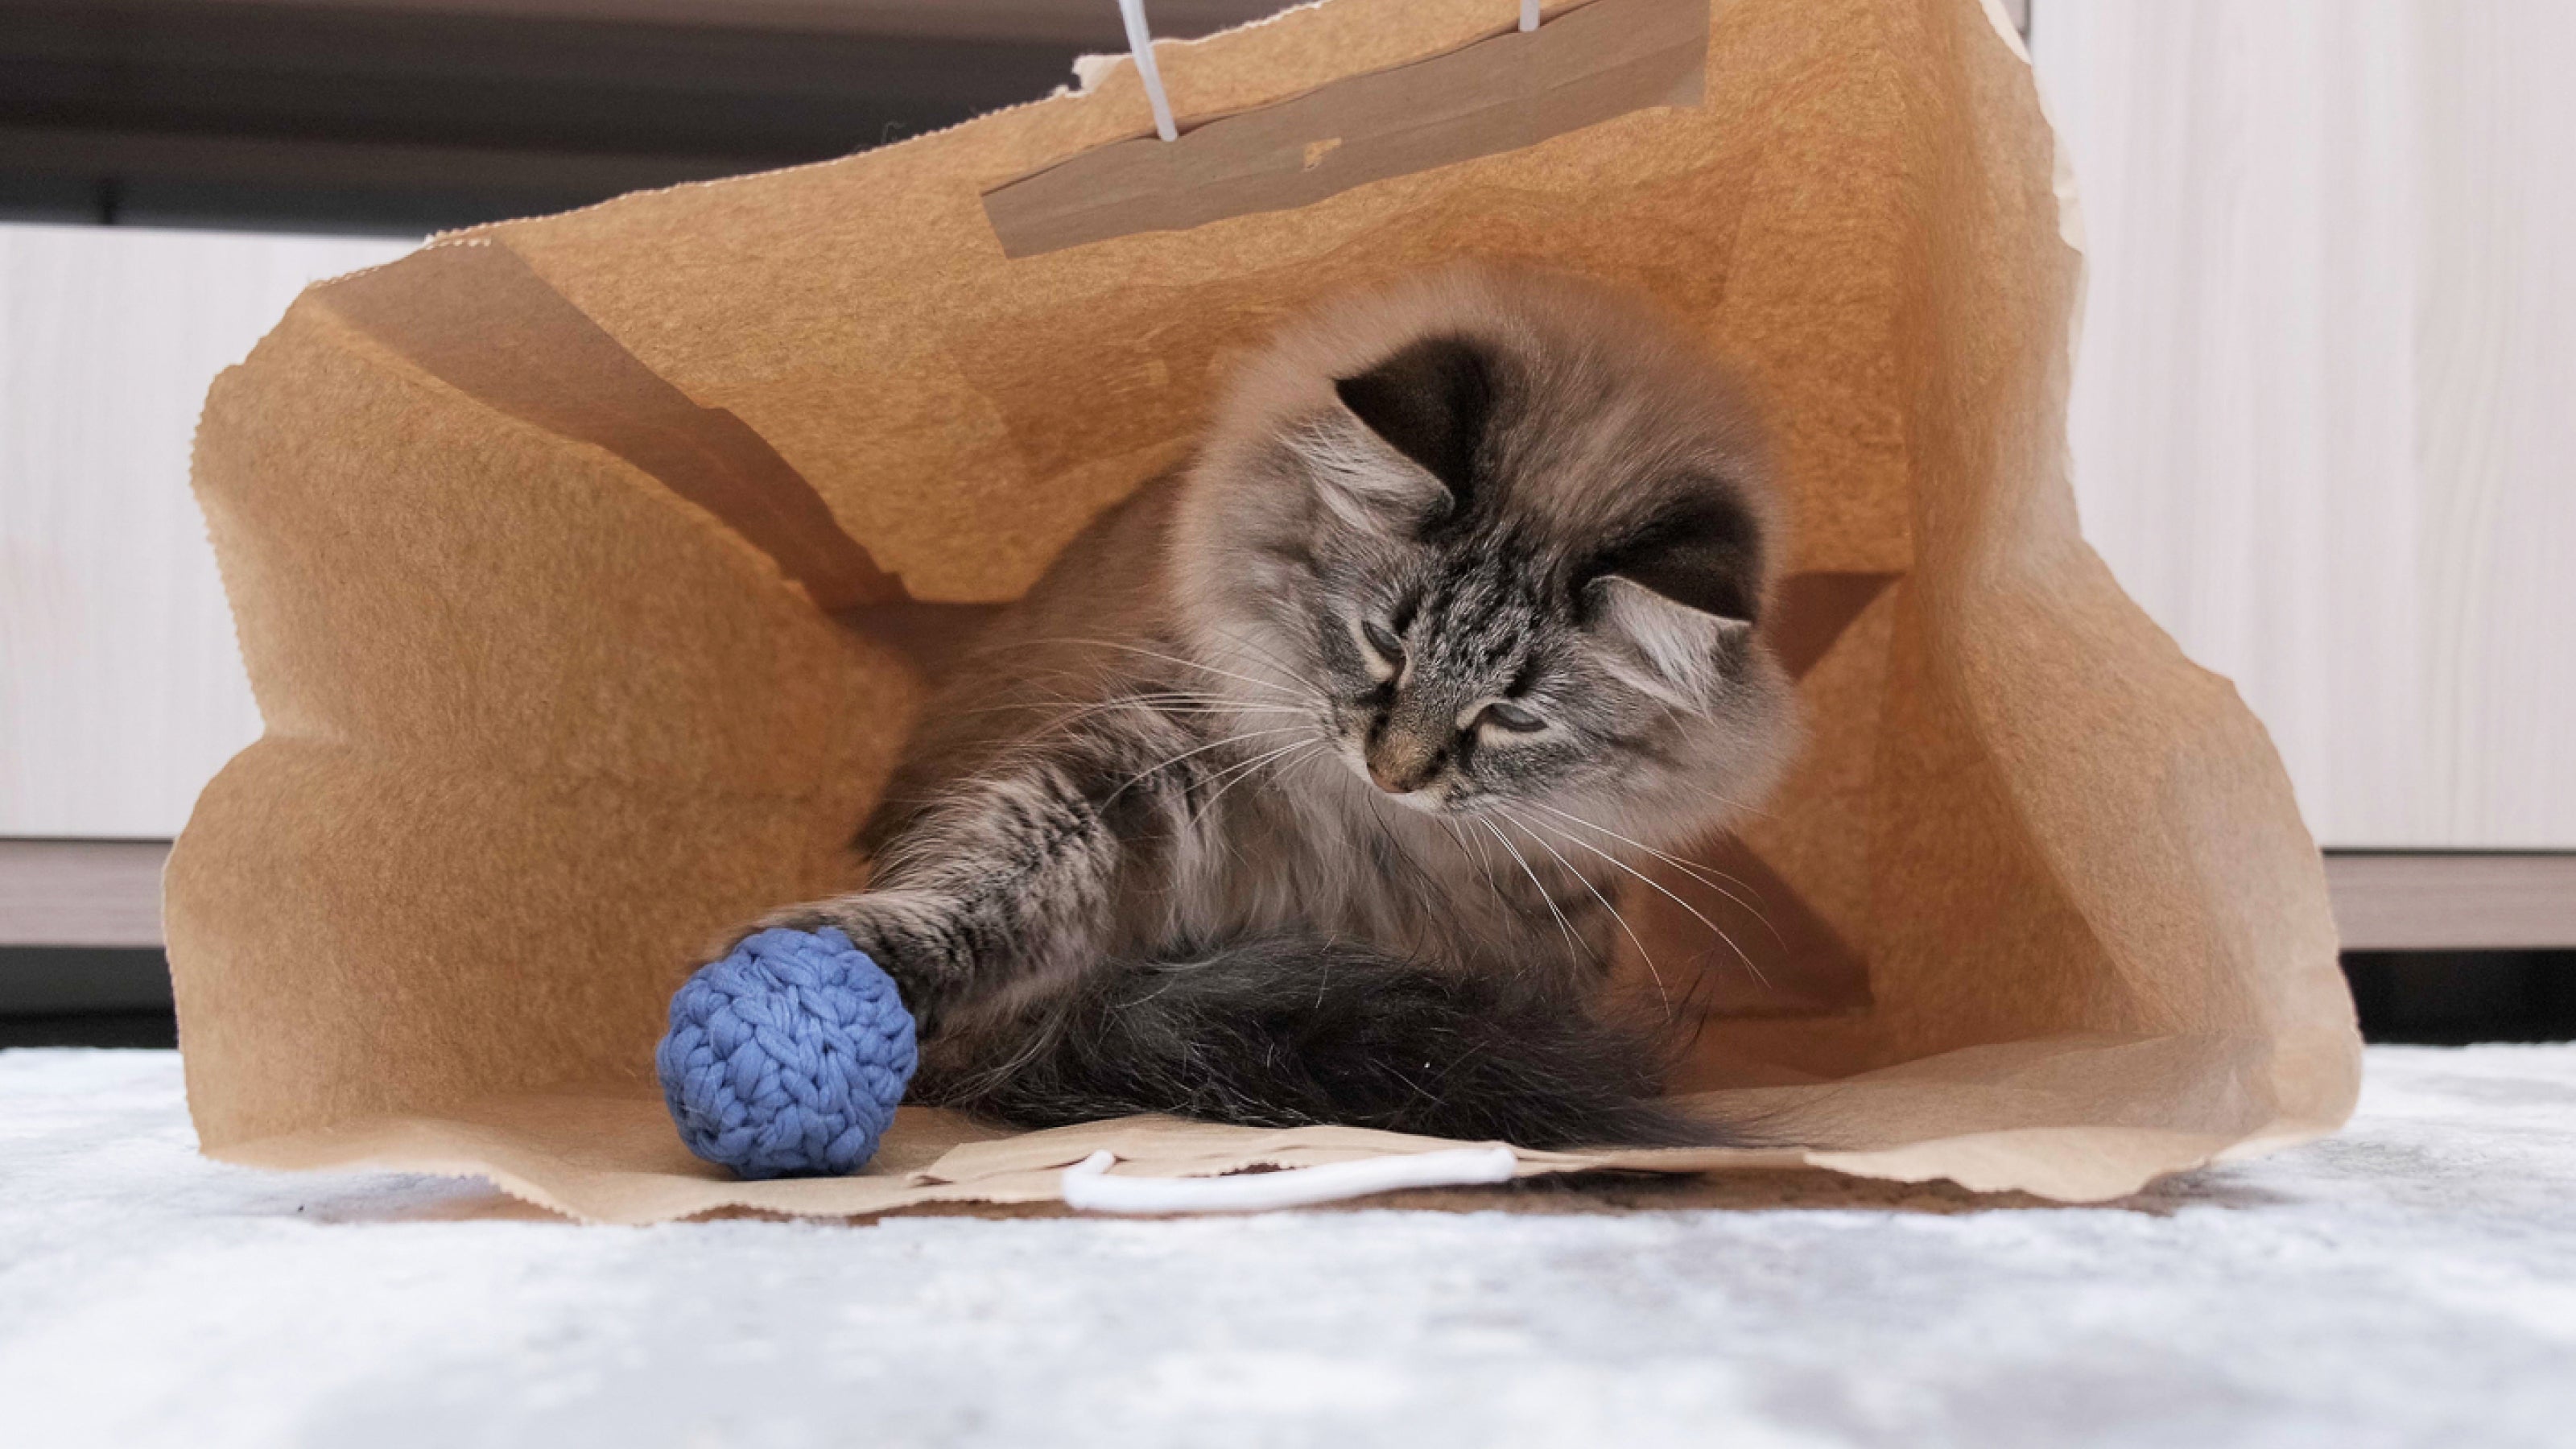 A gray cat playing fetch with a soft perriwinkle pall as they take shelter in a paper bag